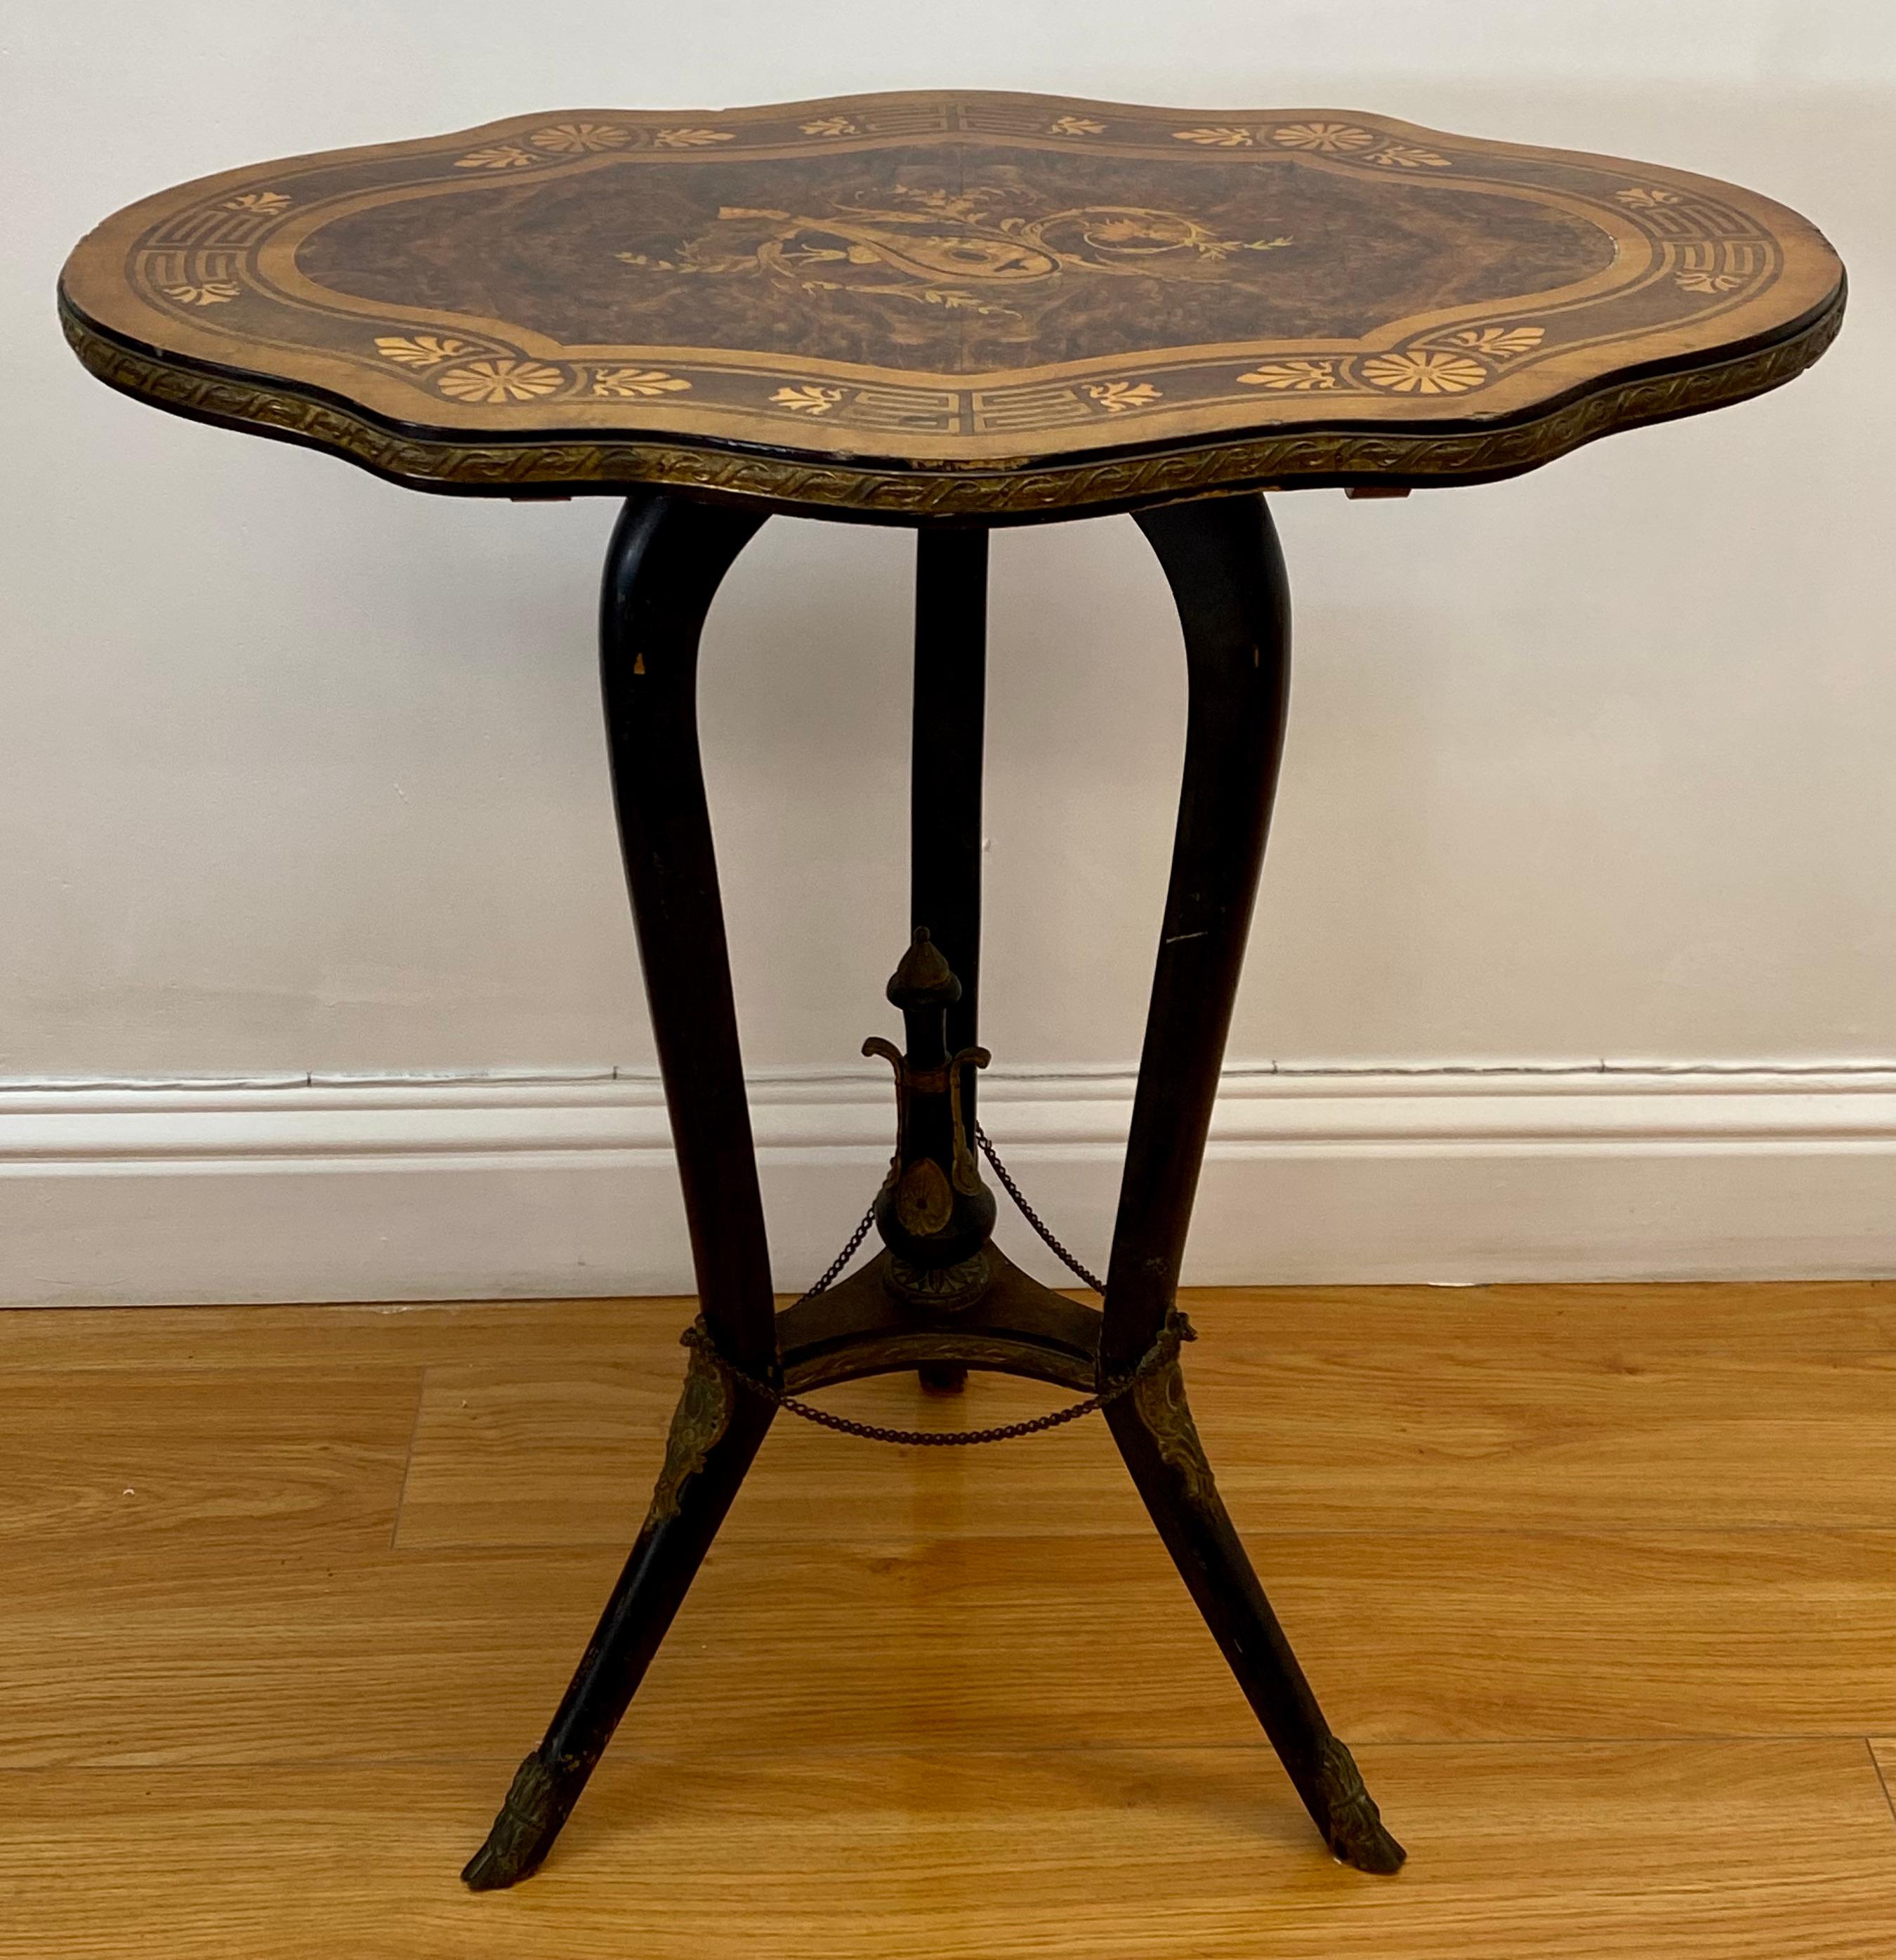 Early 20th century Victorian European walnut inlaid tilt top table c.1900

The ebonized legs and center finial show brass mounts

The hoofed feet also have brass mounts 

A fine inlaid table with musical instruments motif

The table does